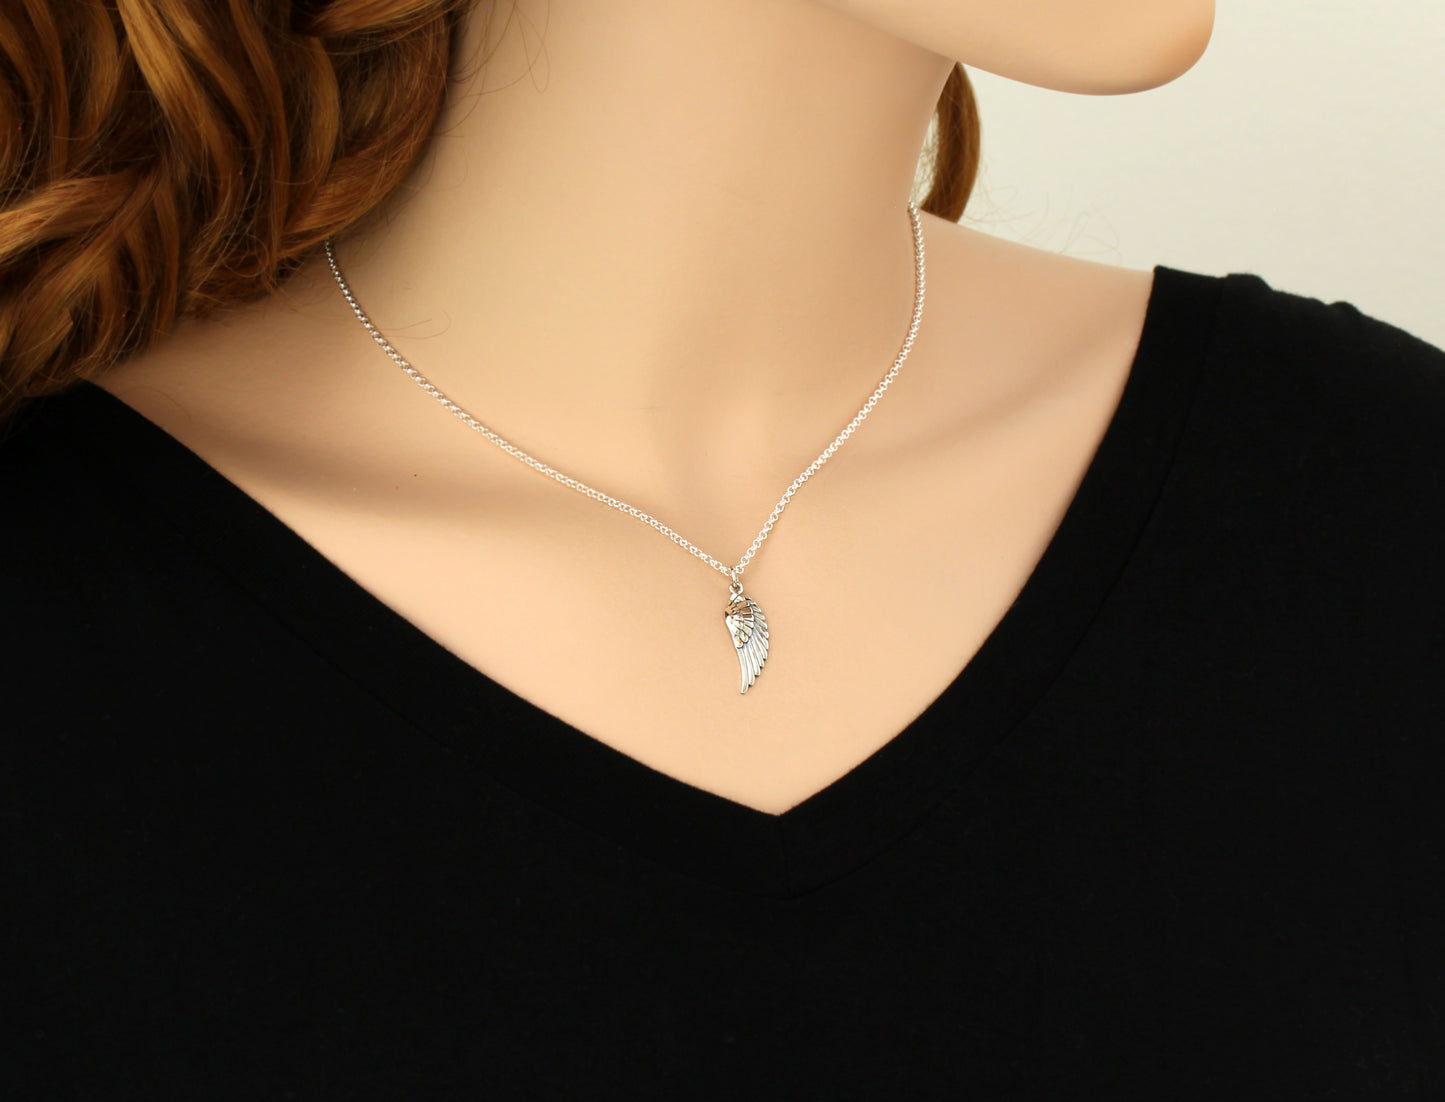 A Charmed Impression 11 11 Large Angel Wing Pendant Necklace • Silver • 1111 Necklace • Make a Wish Necklace • Numerology Ascension • Law of Attraction • Lightworker Jewelry Gift